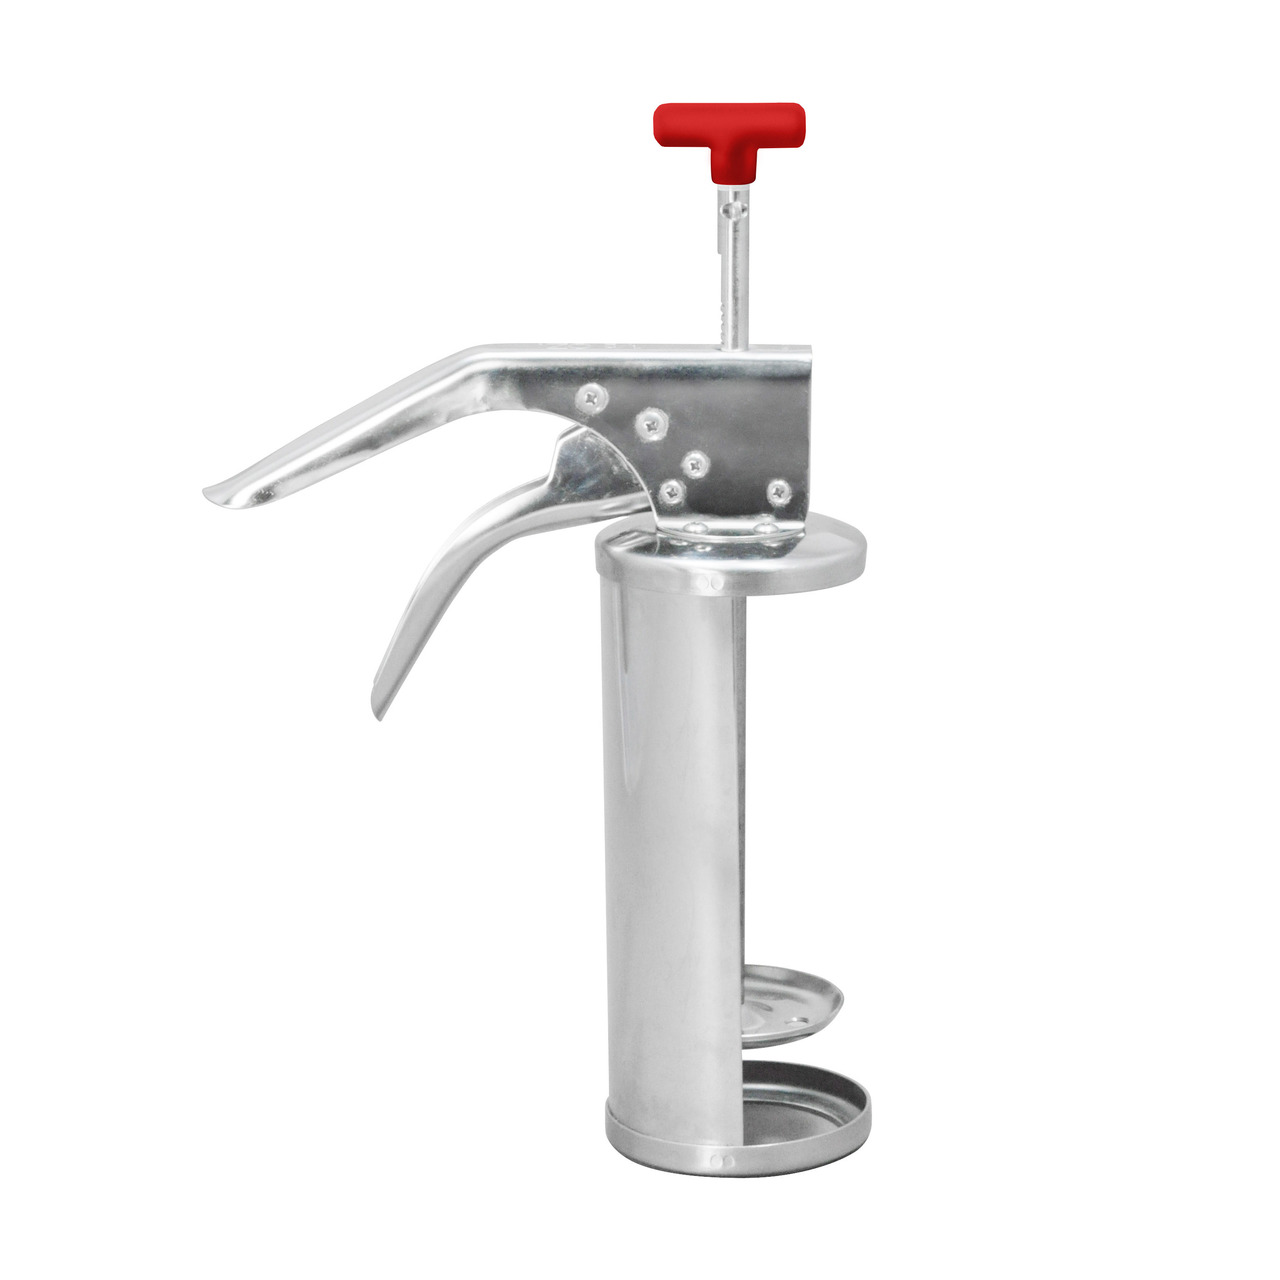 Innovative sauce dispensers: SauceEase Pro is your reliable partner for culinary adventures!